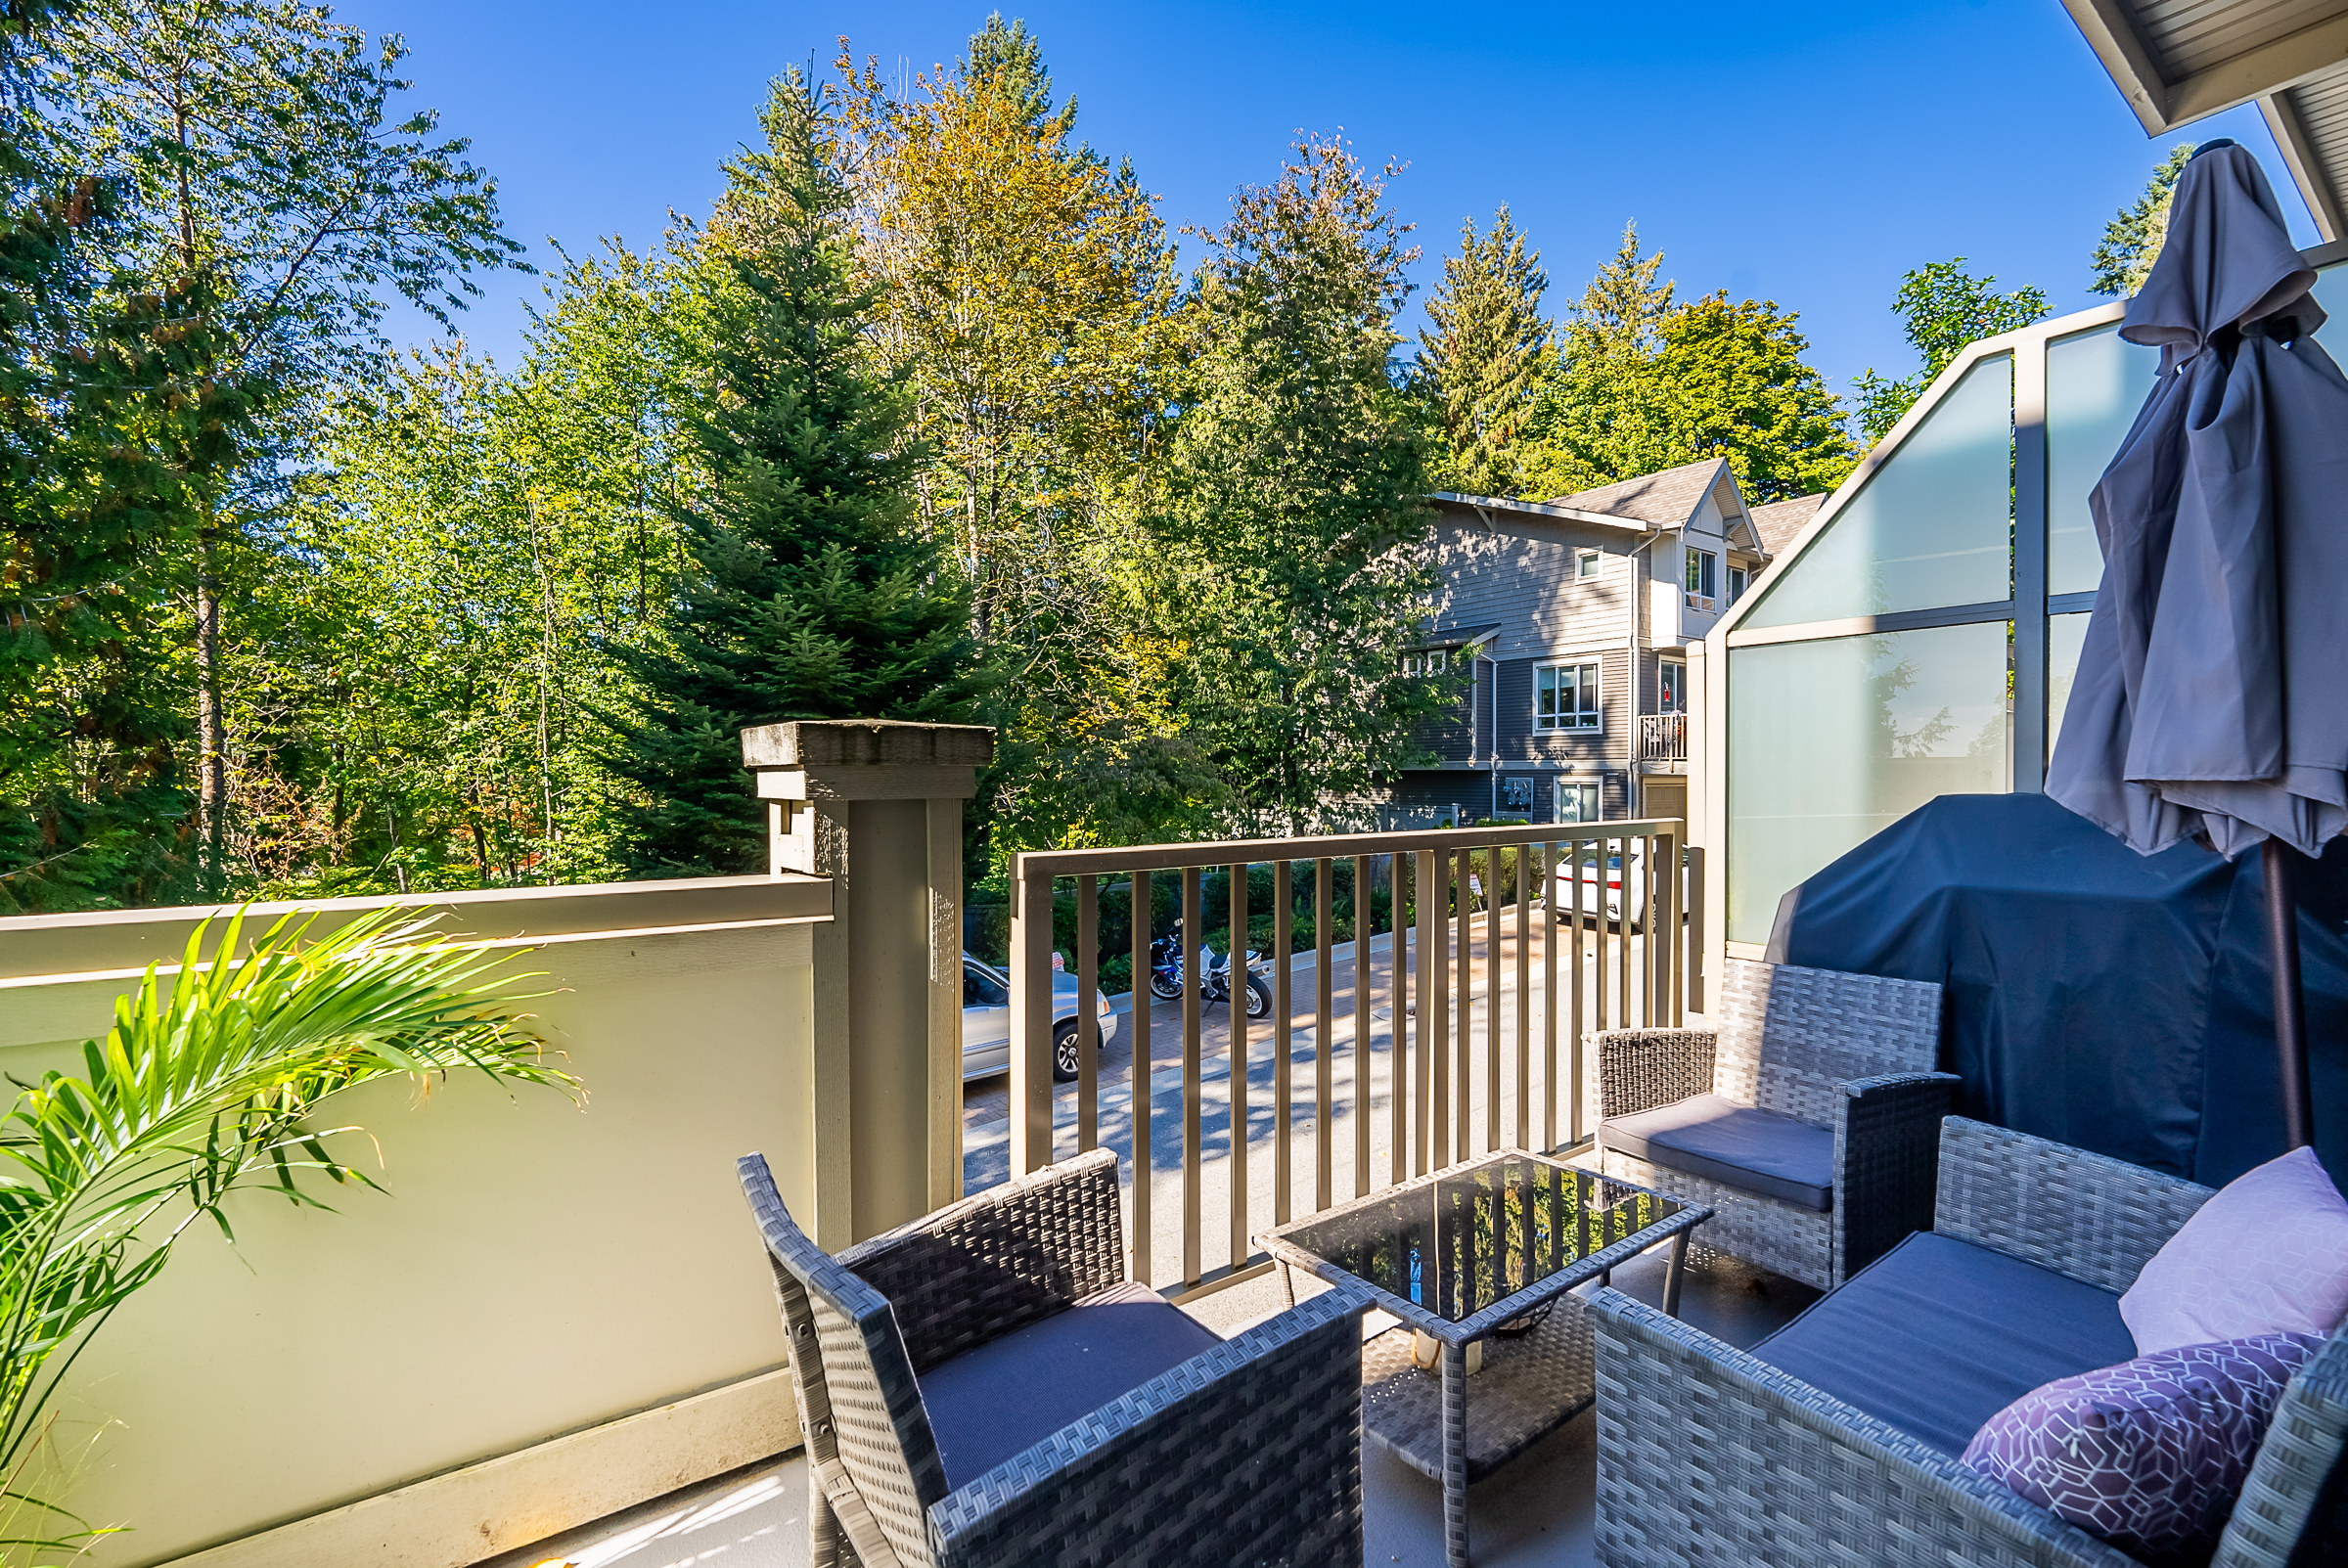 Burke Mountain Realtor Krista Lapp Coquitlam Townhome for sale MLS Listings